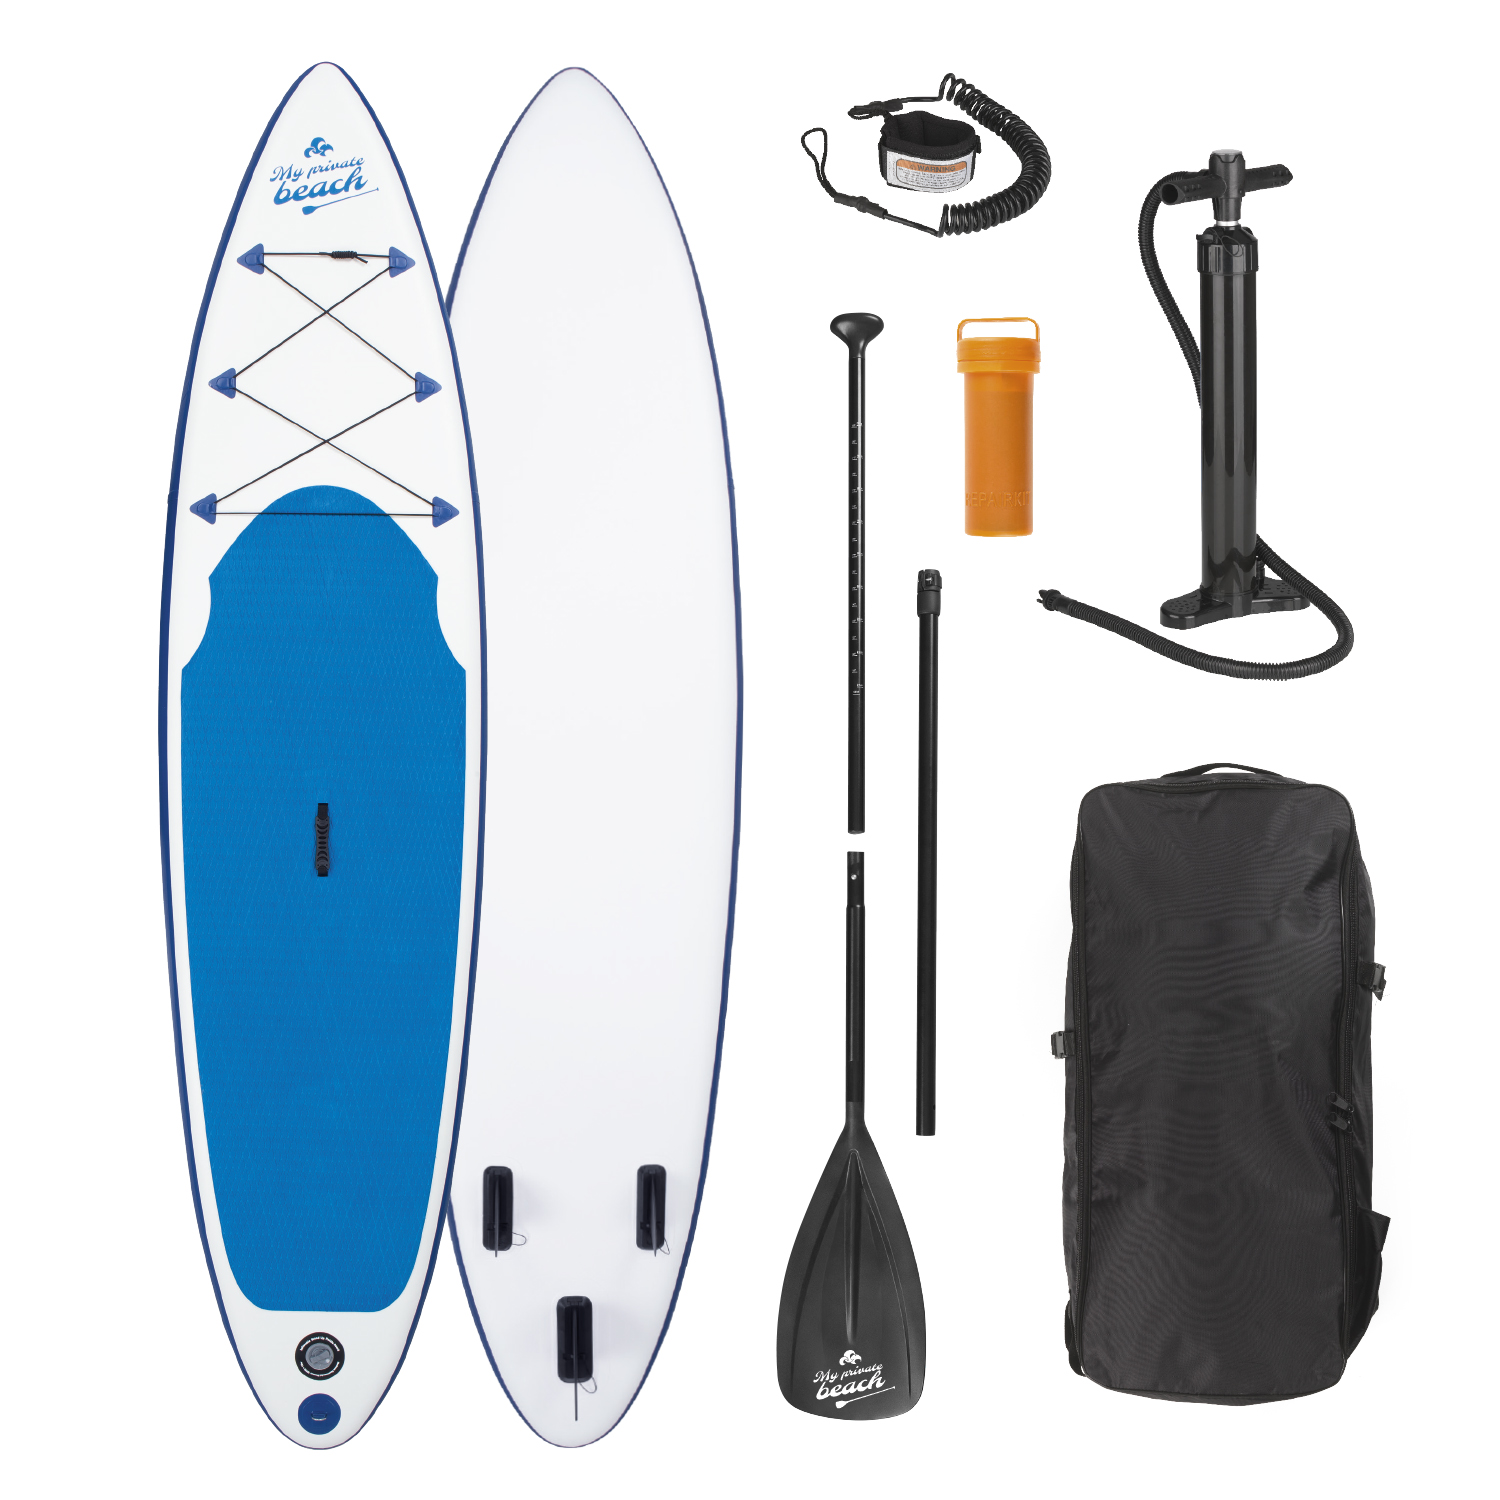 EASYMAXX 06900 Stand-Up Paddle-Board, mehrfarbig